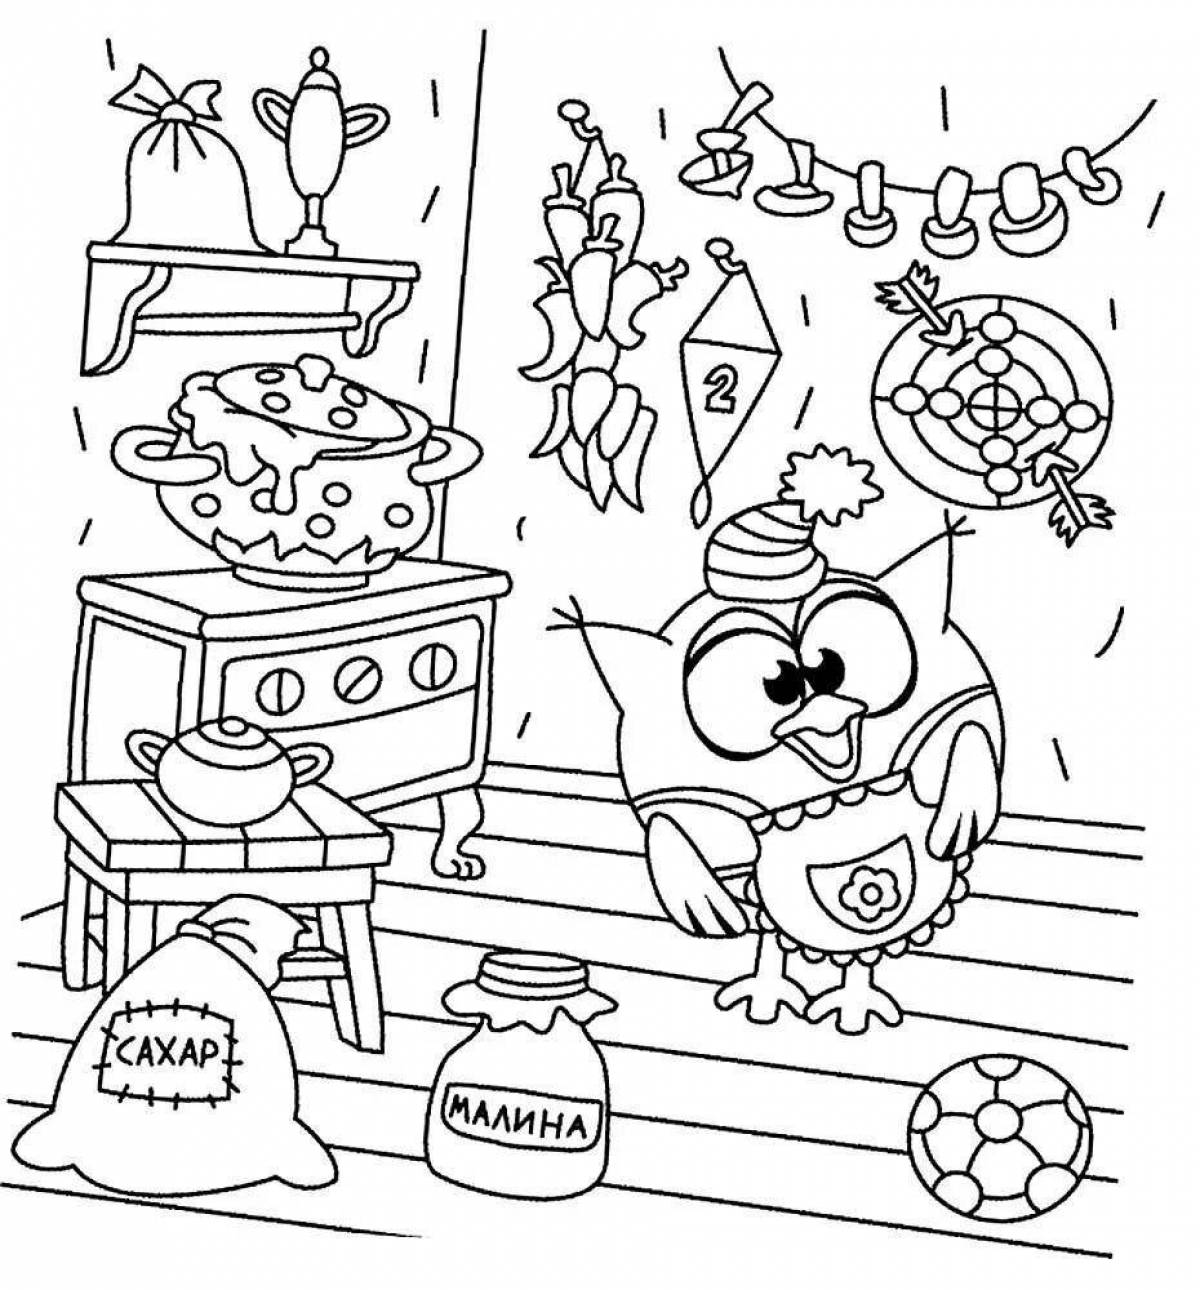 Inviting bakeries coloring pages